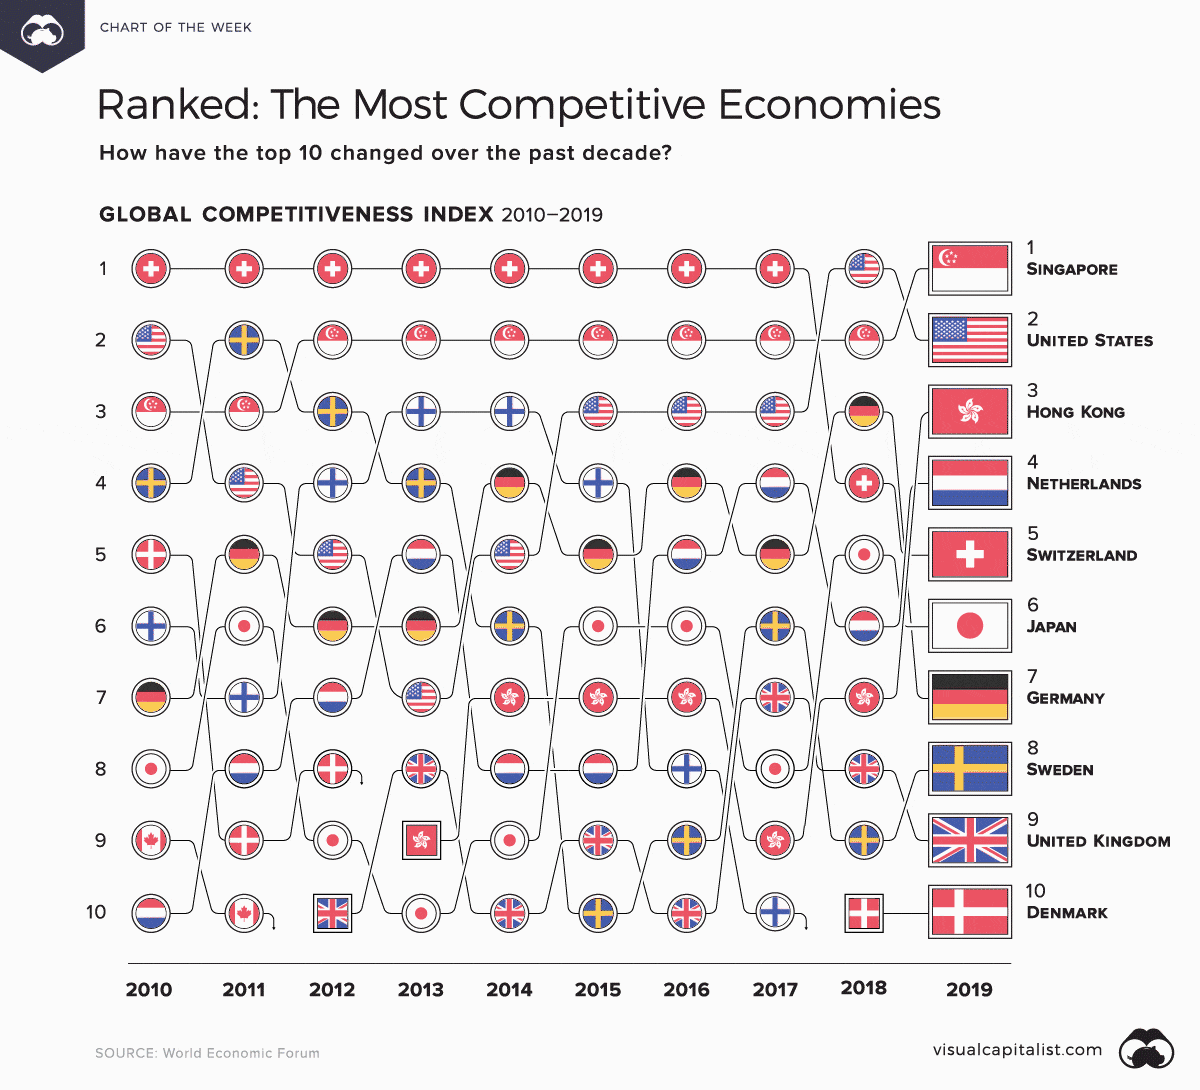 The world's most competitive economies